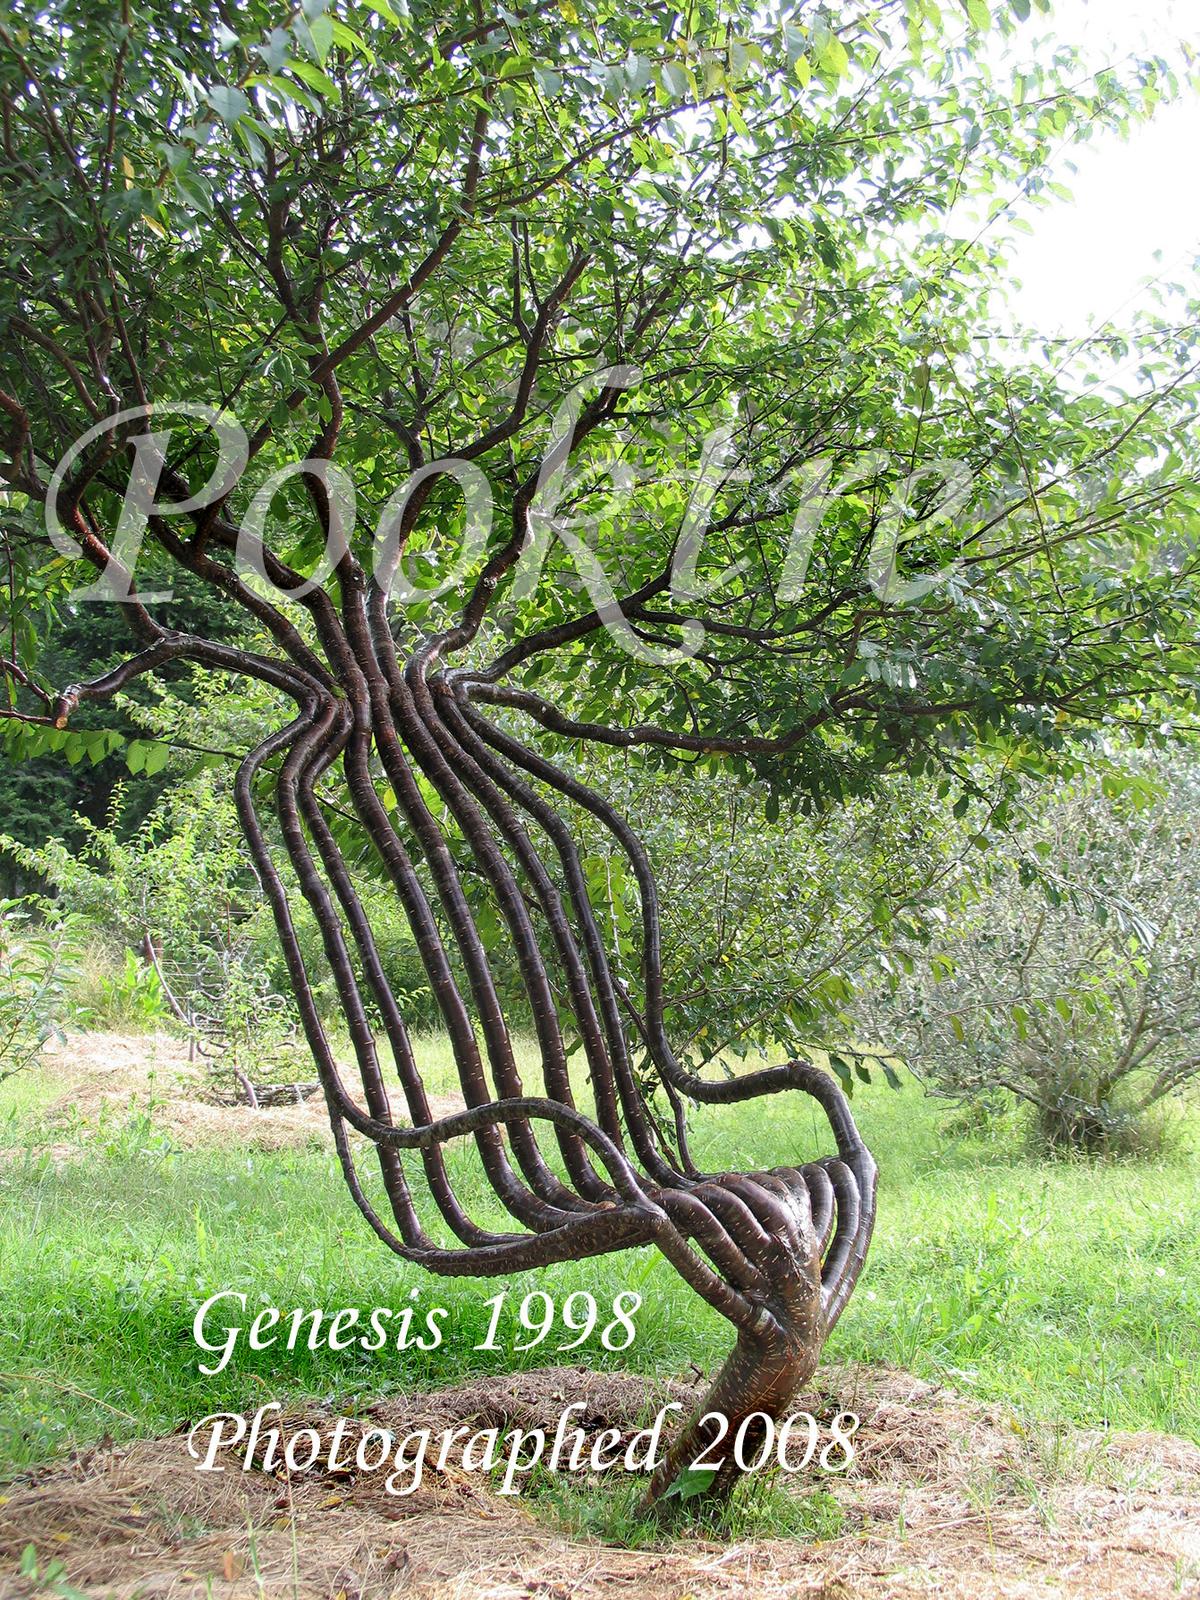 The "living chair." (Courtesy of <a href="https://www.pooktre.com/">Pooktre</a>)